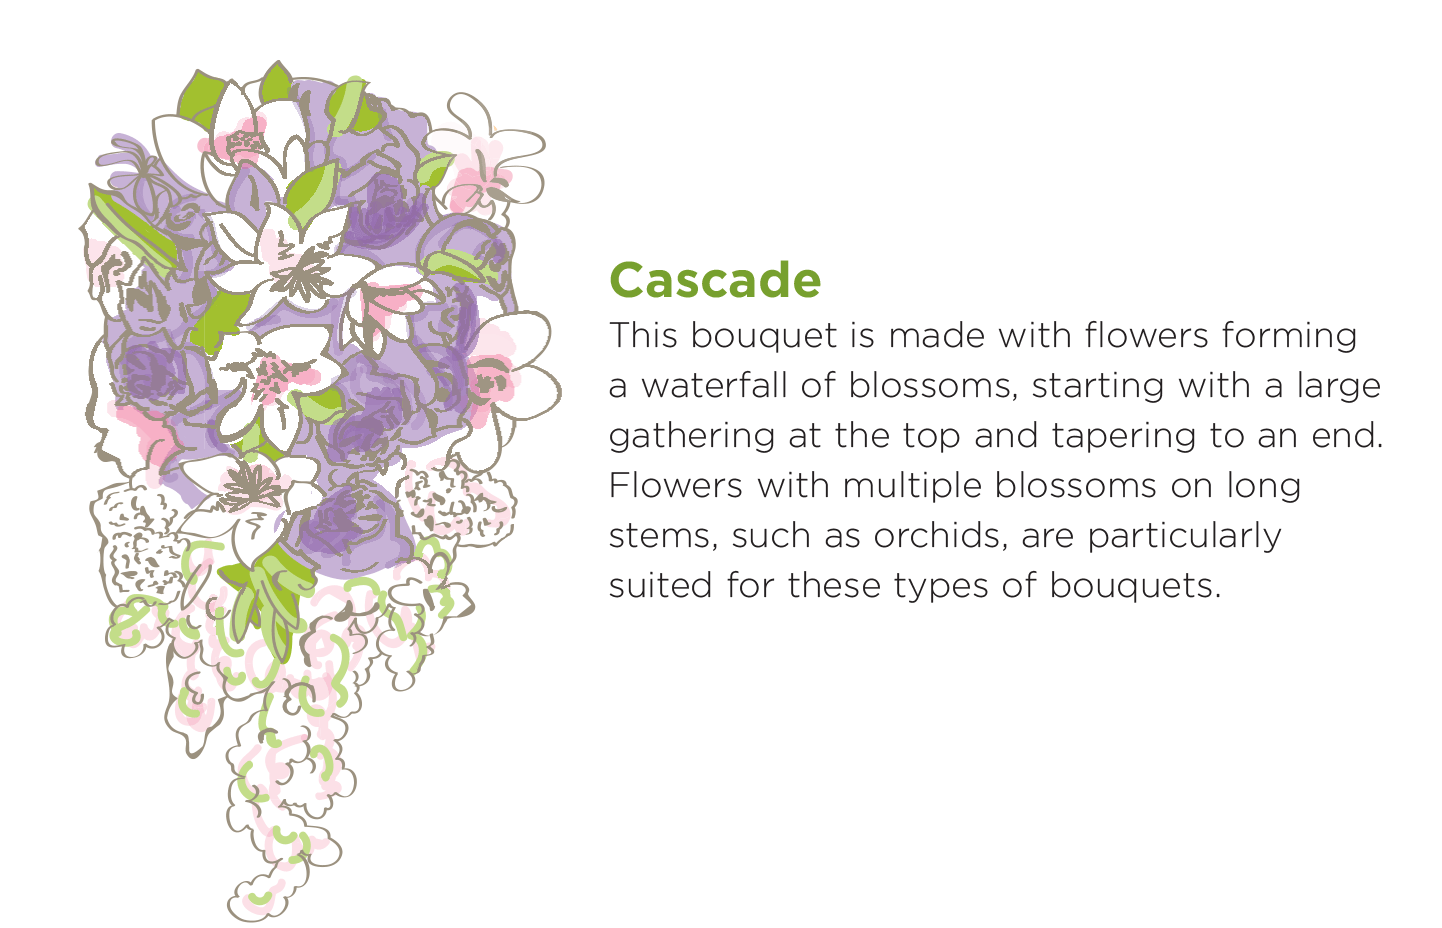 Cascade - This bouquet is made with flowers forming a waterfall of blossoms, starting with a large gathering at the top and tapering to an end. Flowers with multiple blossoms on long stems, such as orchiads are particularly suited for these types of bouquets. 